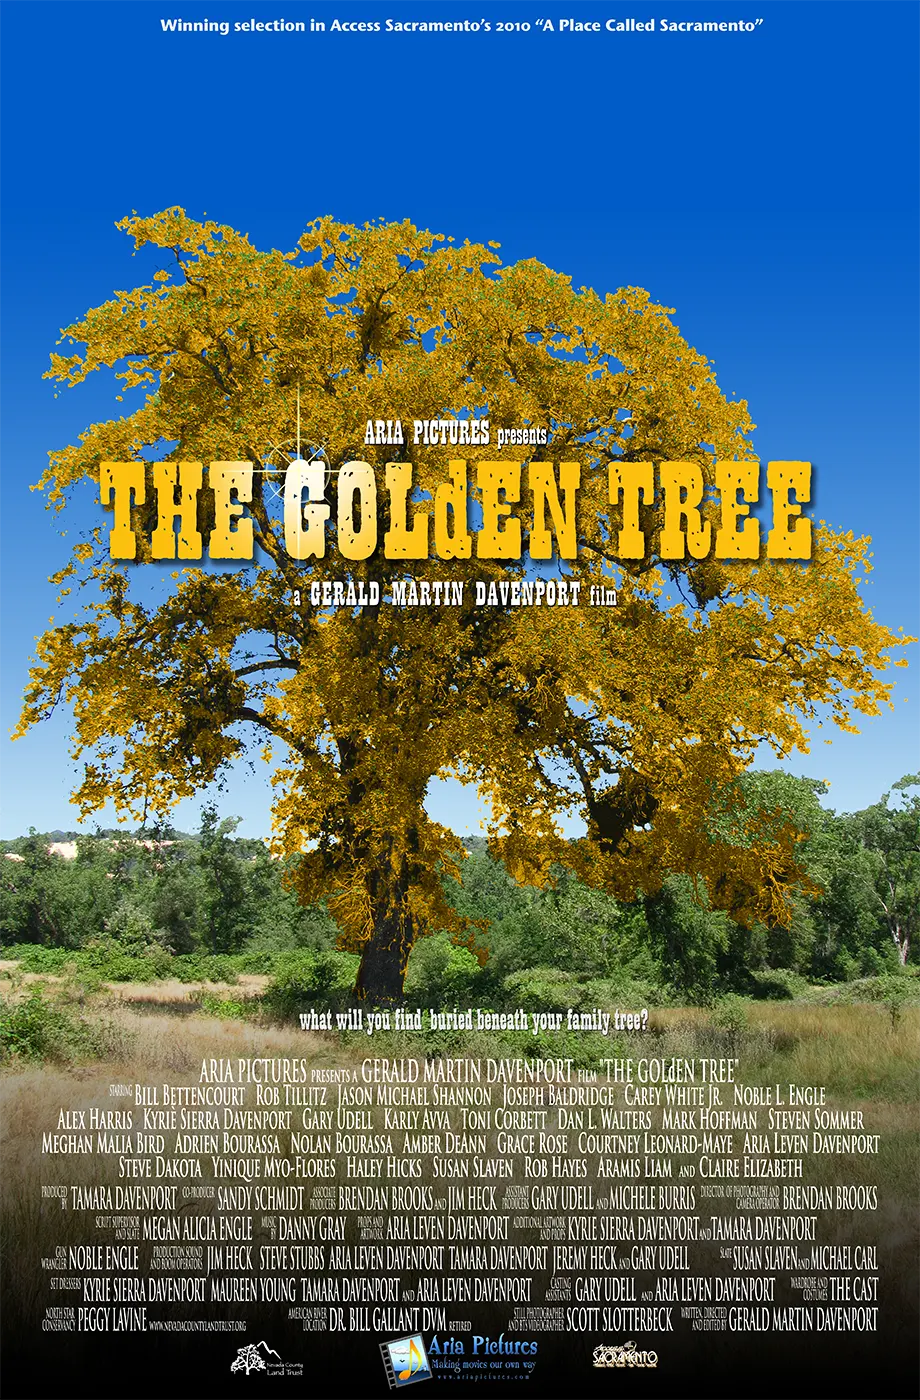 THE GOLdEN TREE (2010) official movie poster.